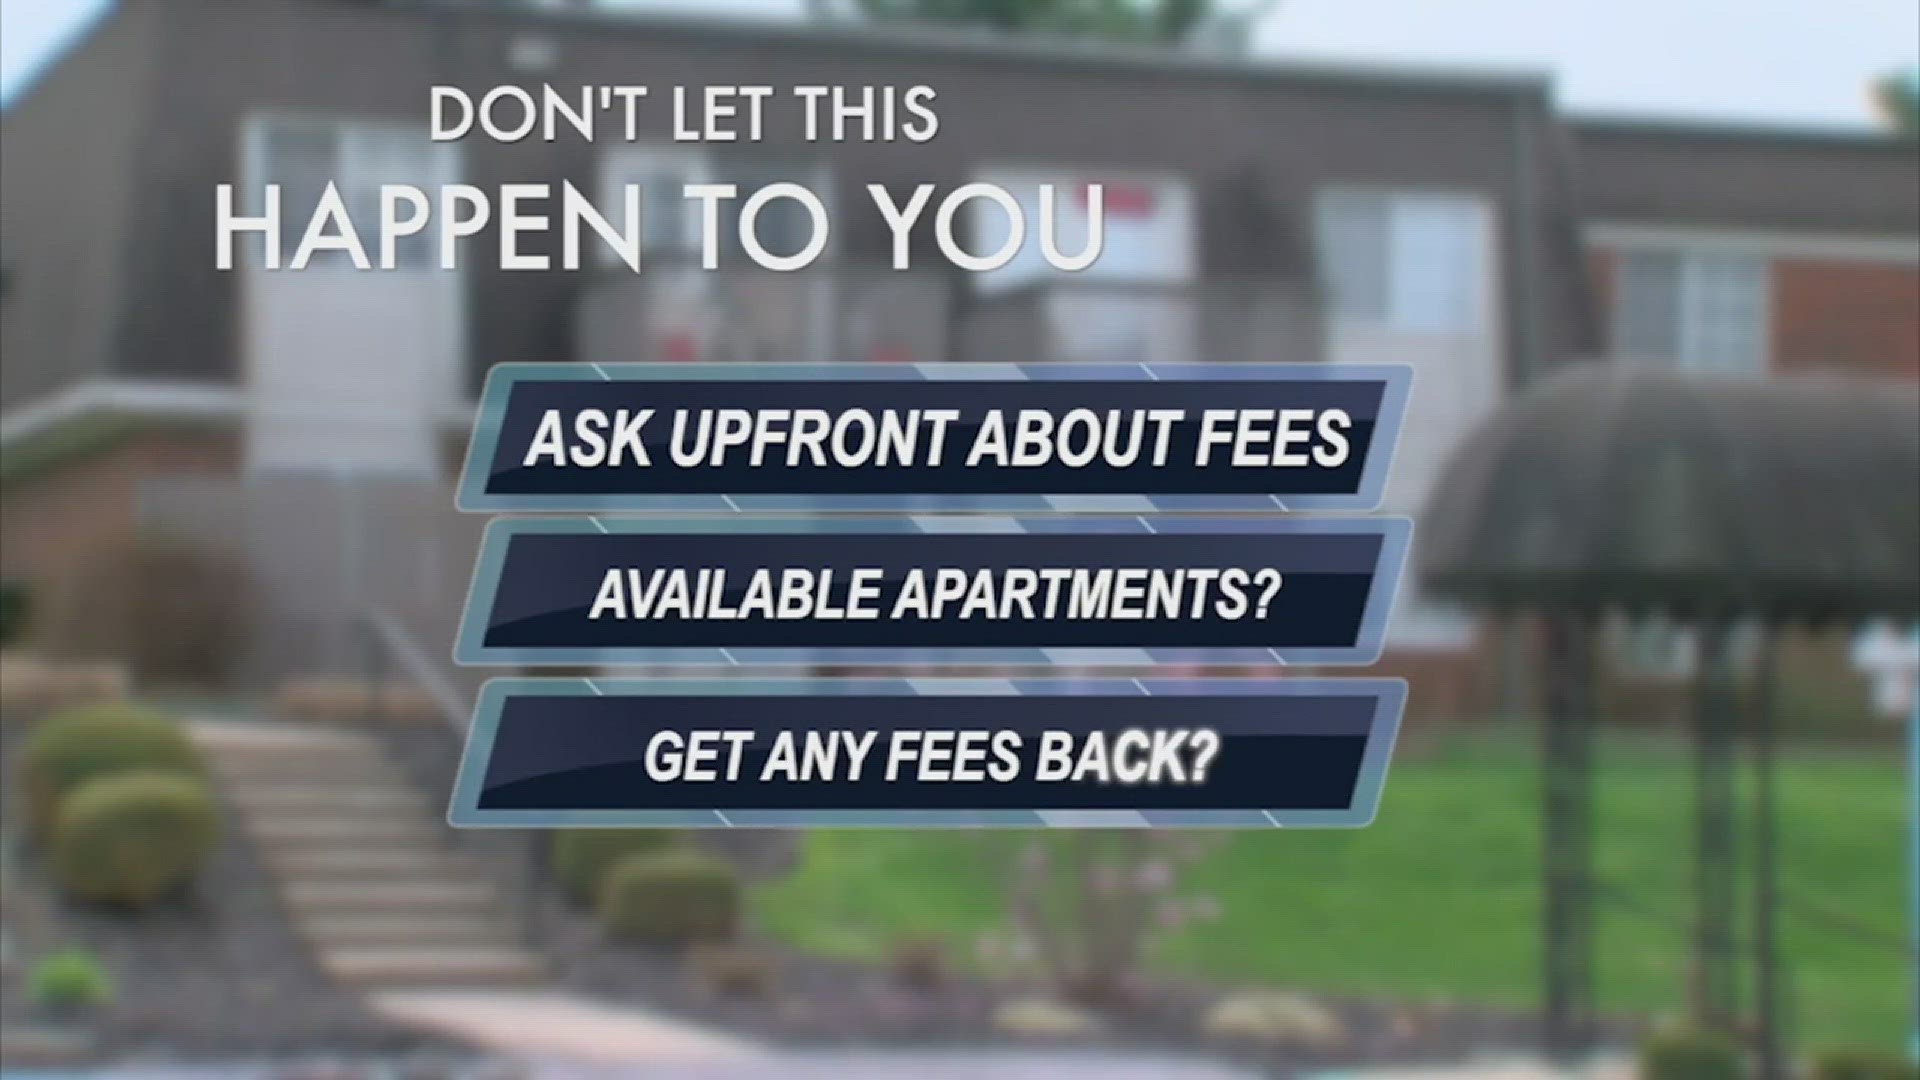 Some people are getting blindsided by the high fees, and it's important to know what to ask for before you sign off on these fees.